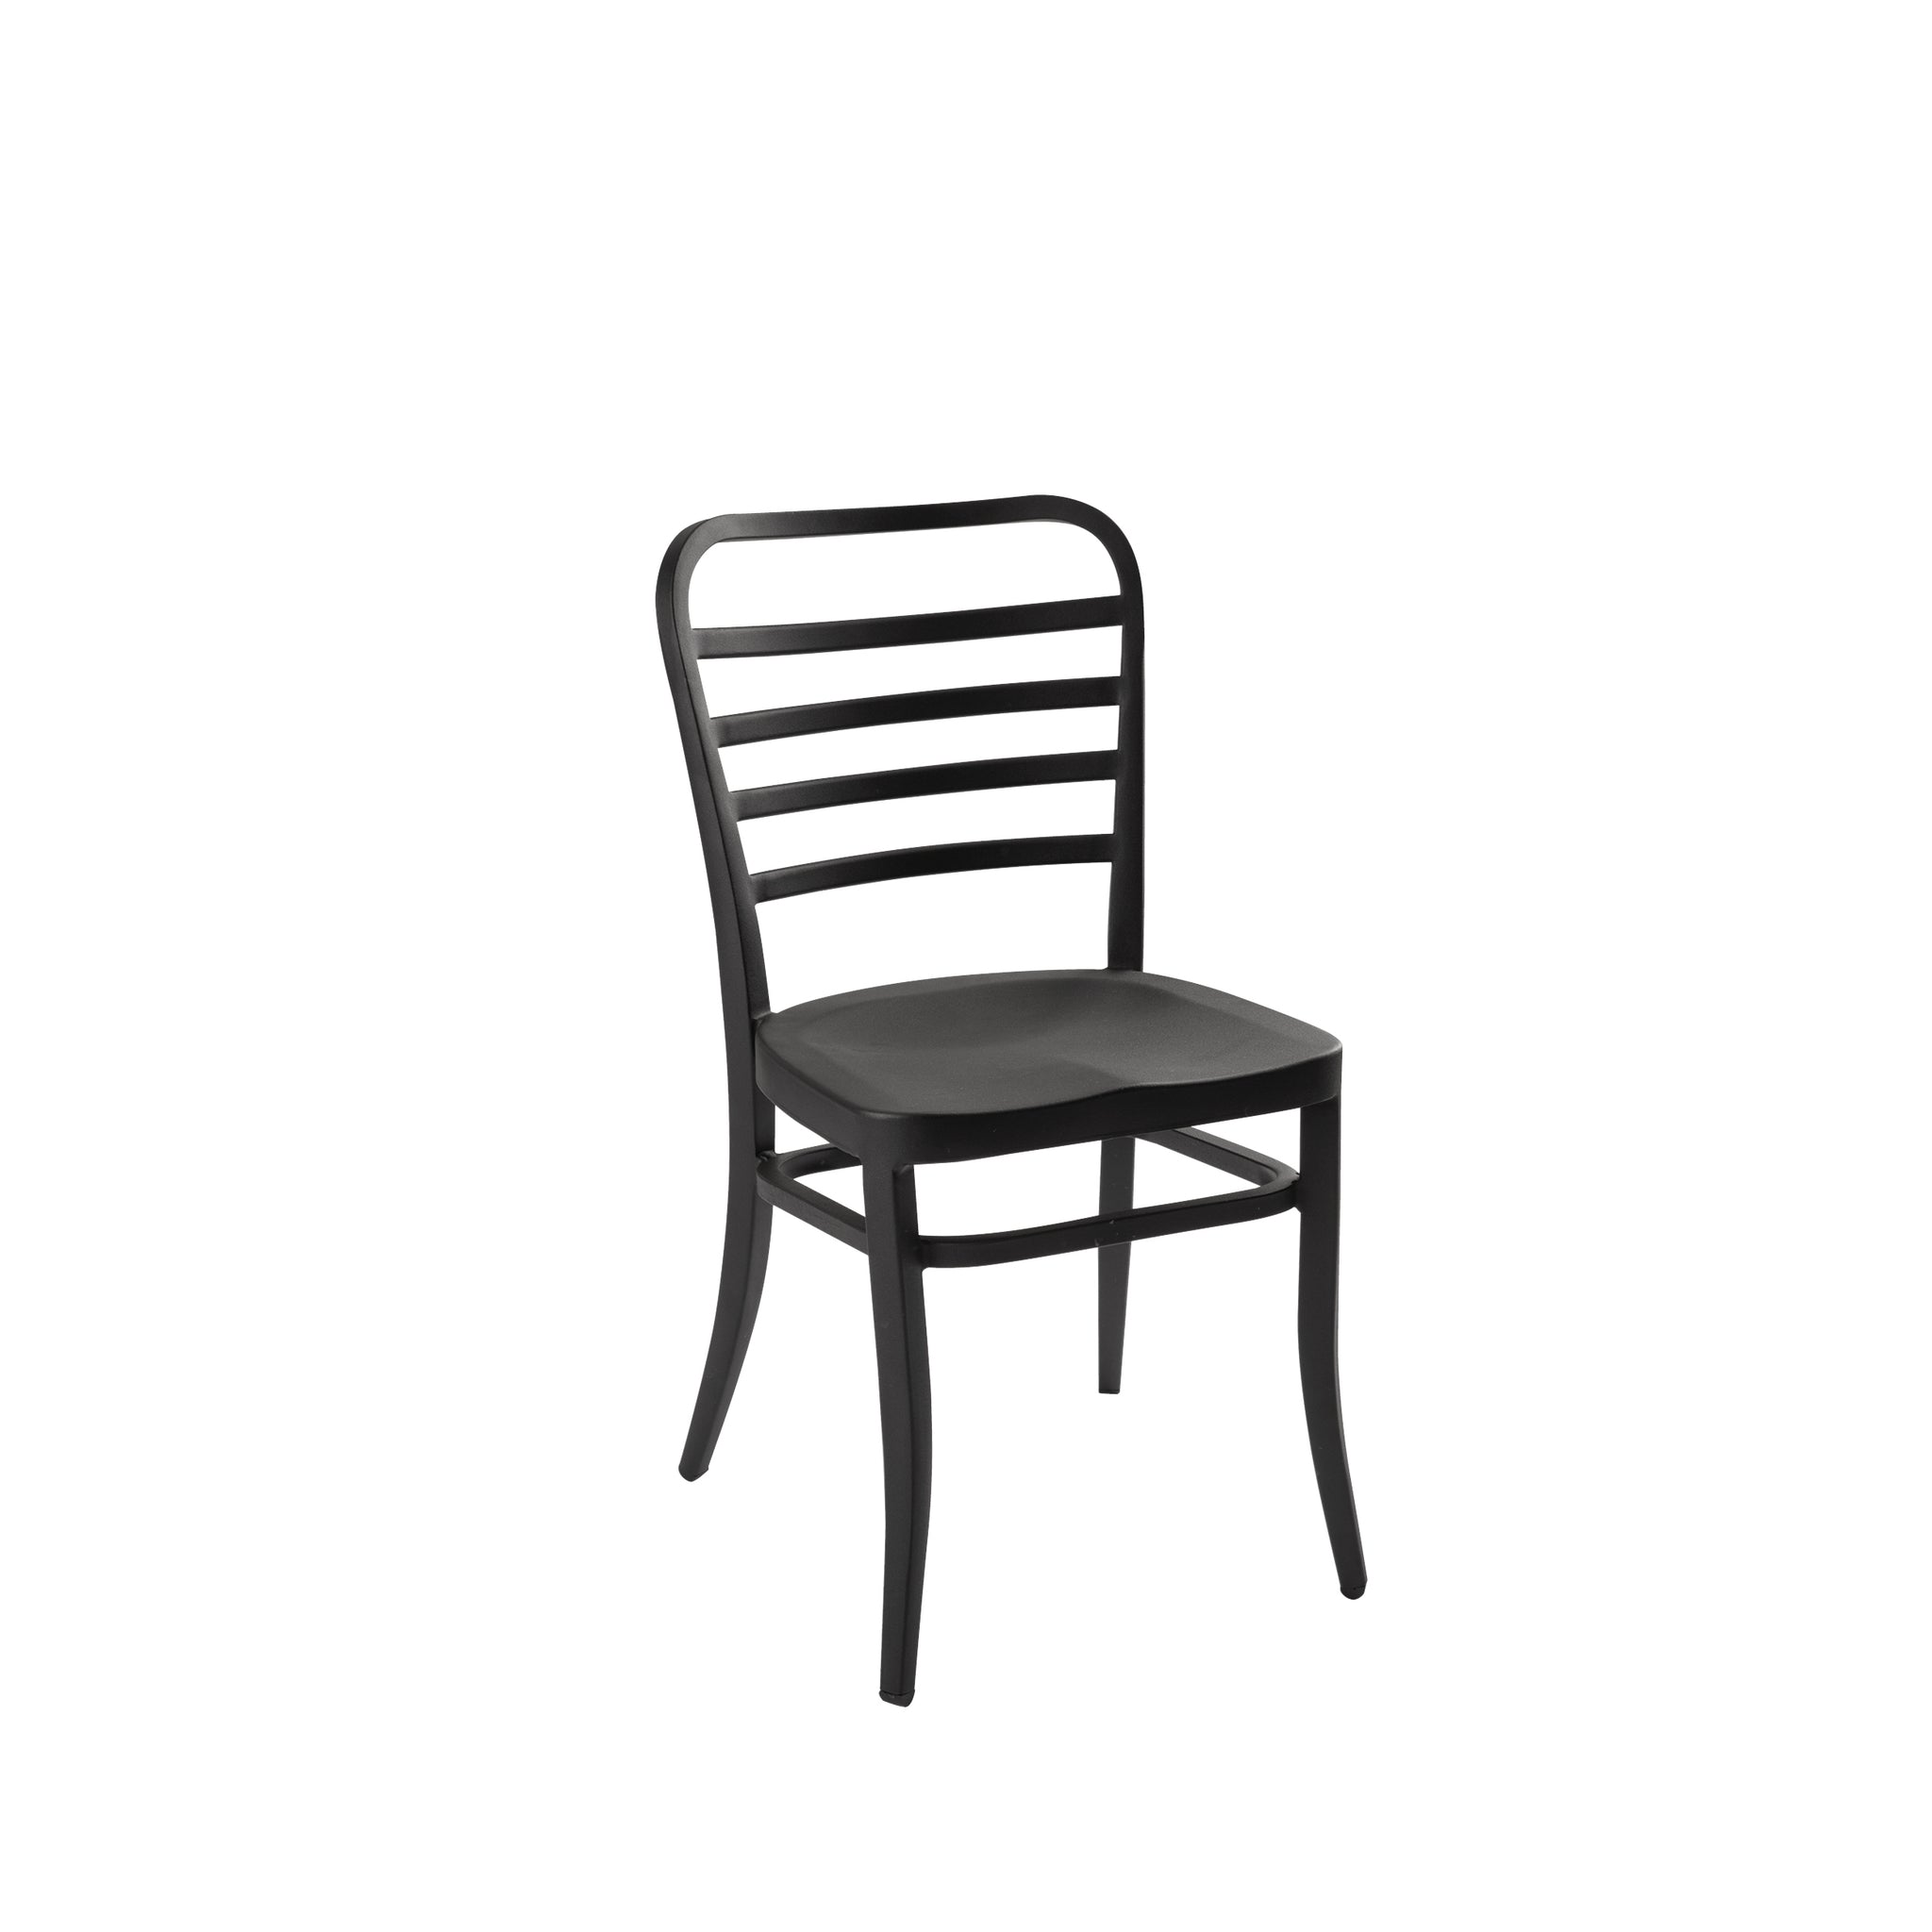 Hedcor Soda Chair